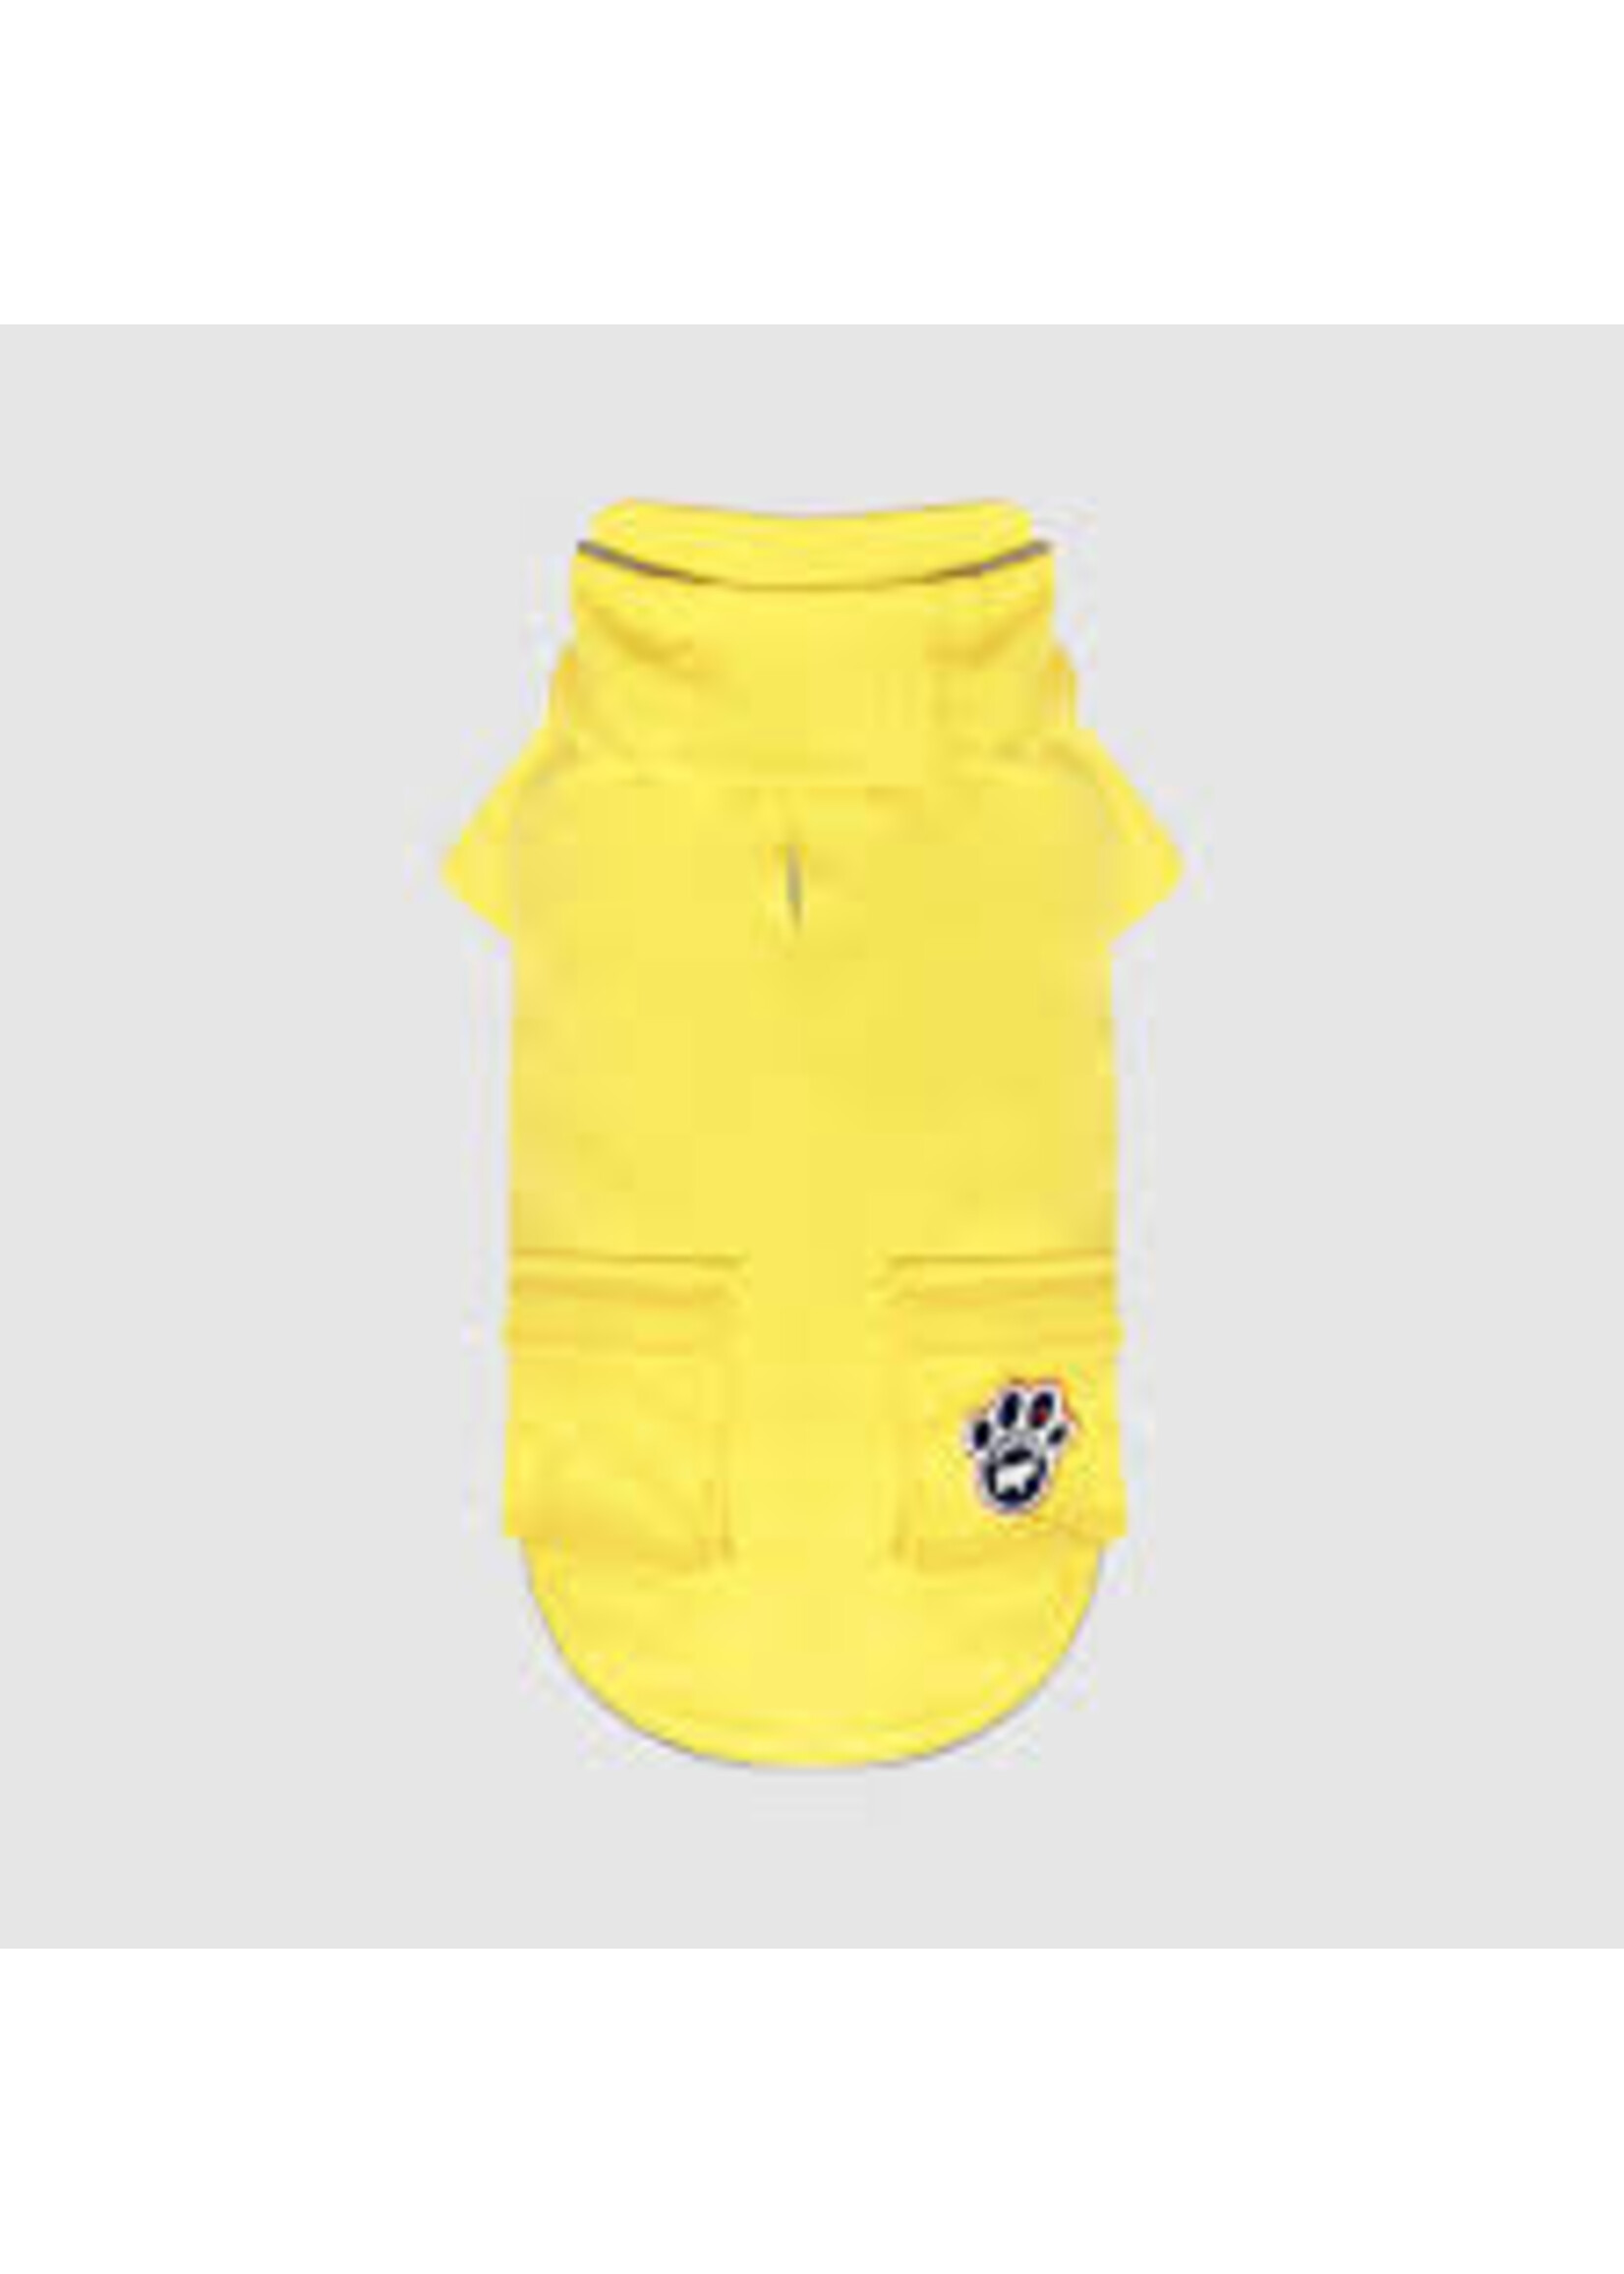 Canada Pooch Canada Pooch Core Torrential Tracker Yellow Size 8